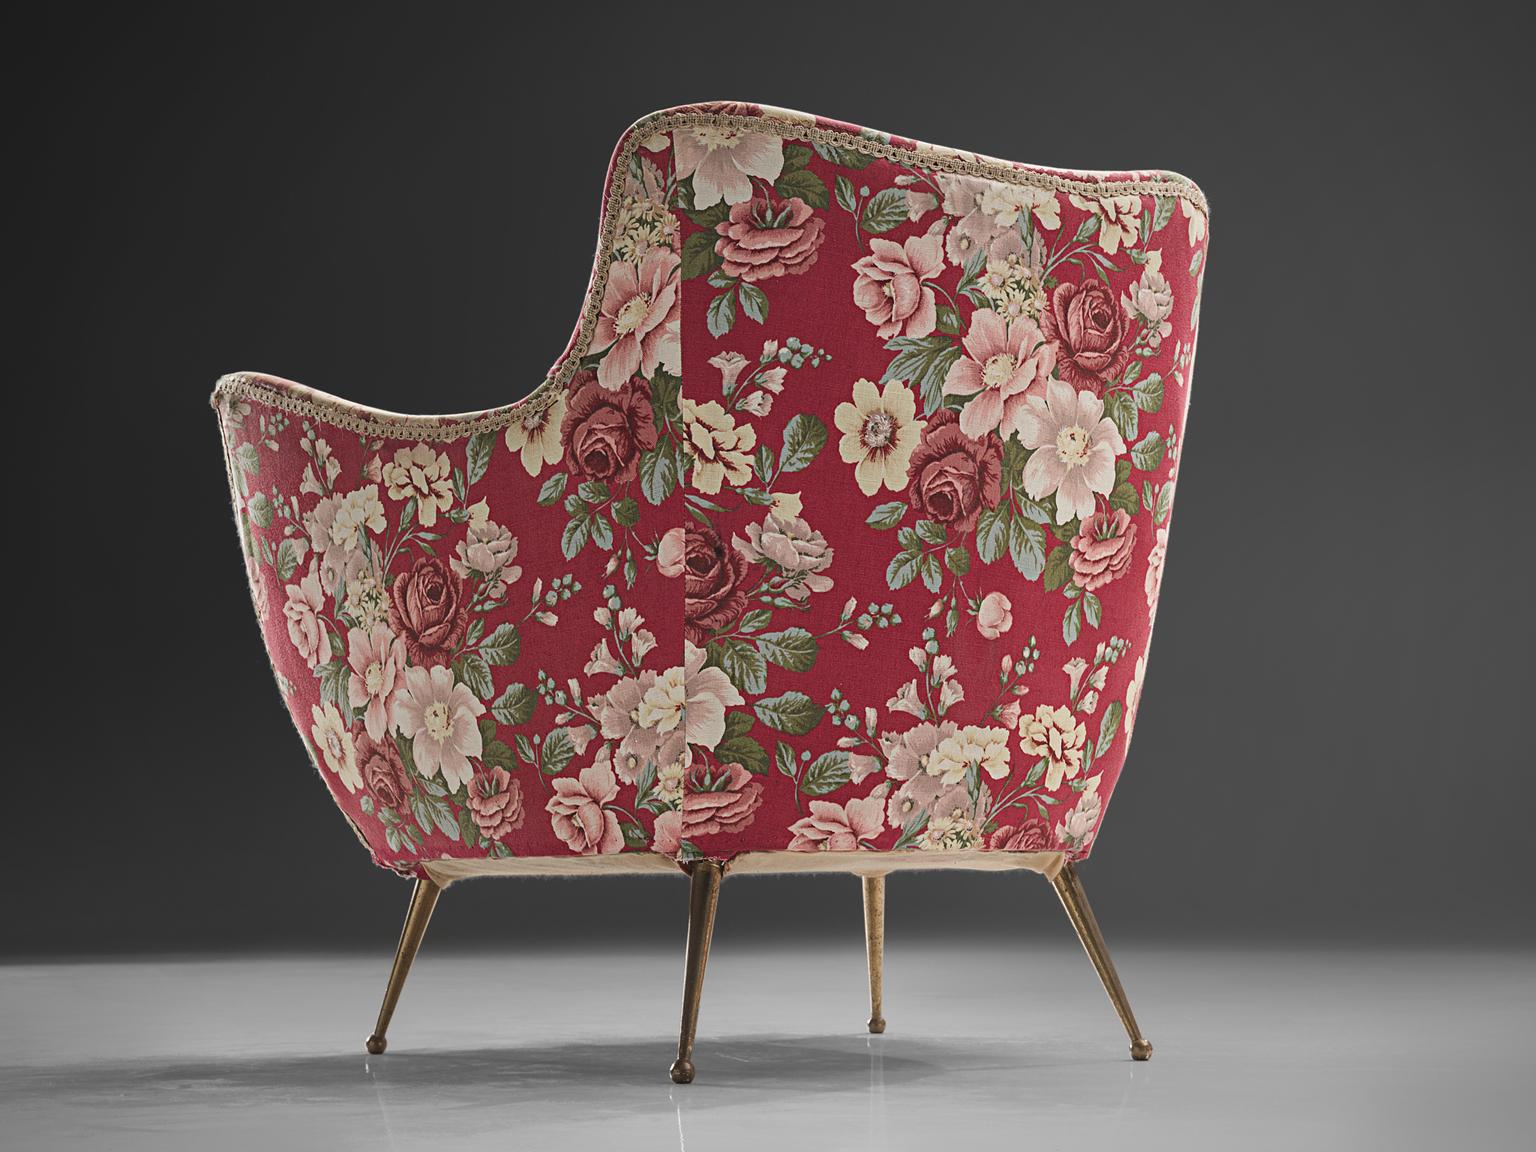 Brass Pair of Lounge Chairs with Red Floral Upholstery by ISA Bergamo